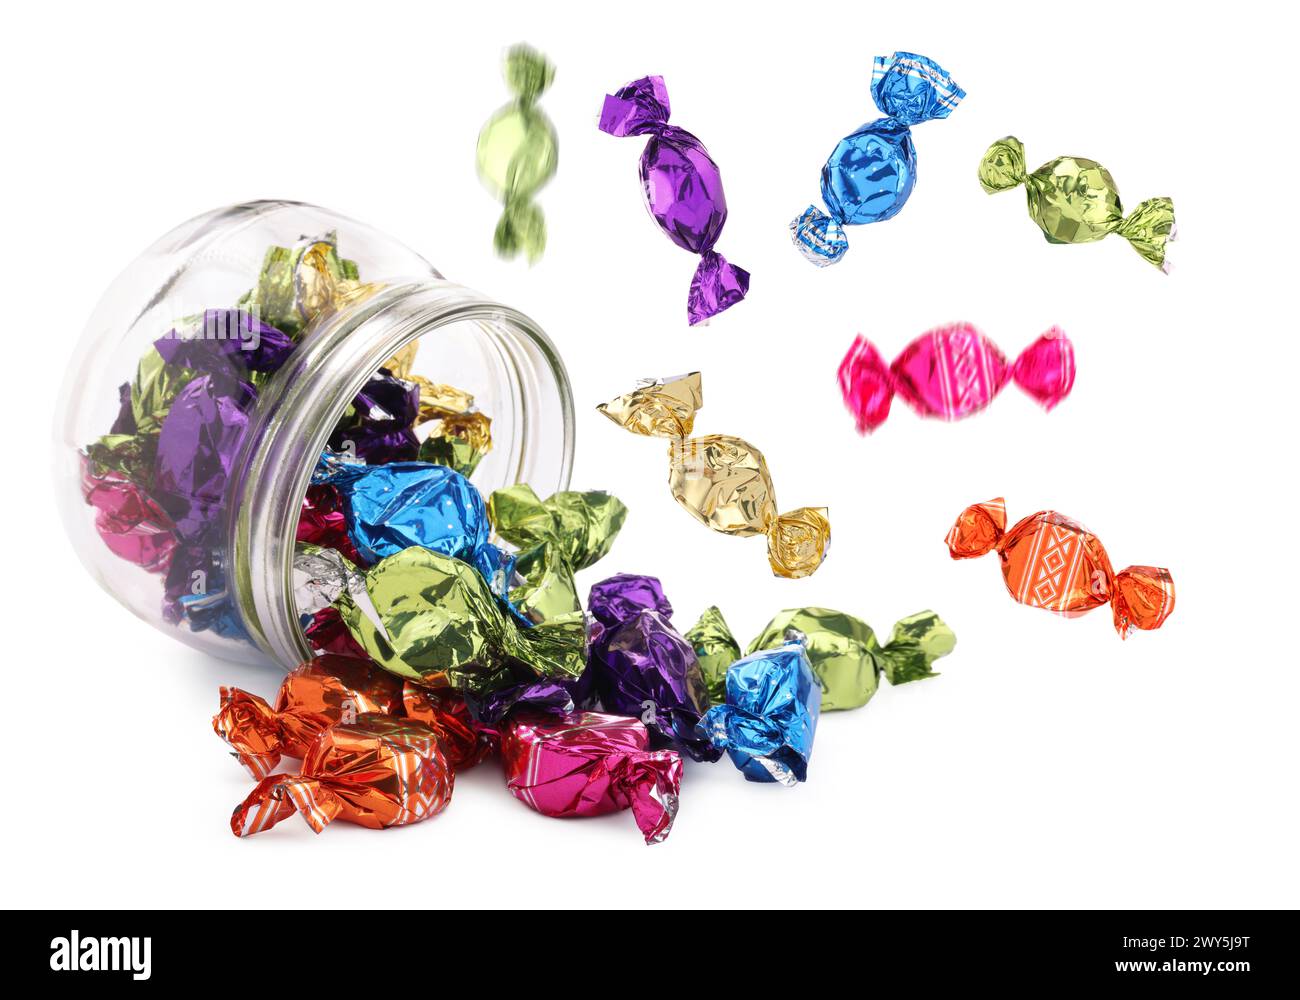 Candies in bright wrappers falling over jar on white background Stock Photo